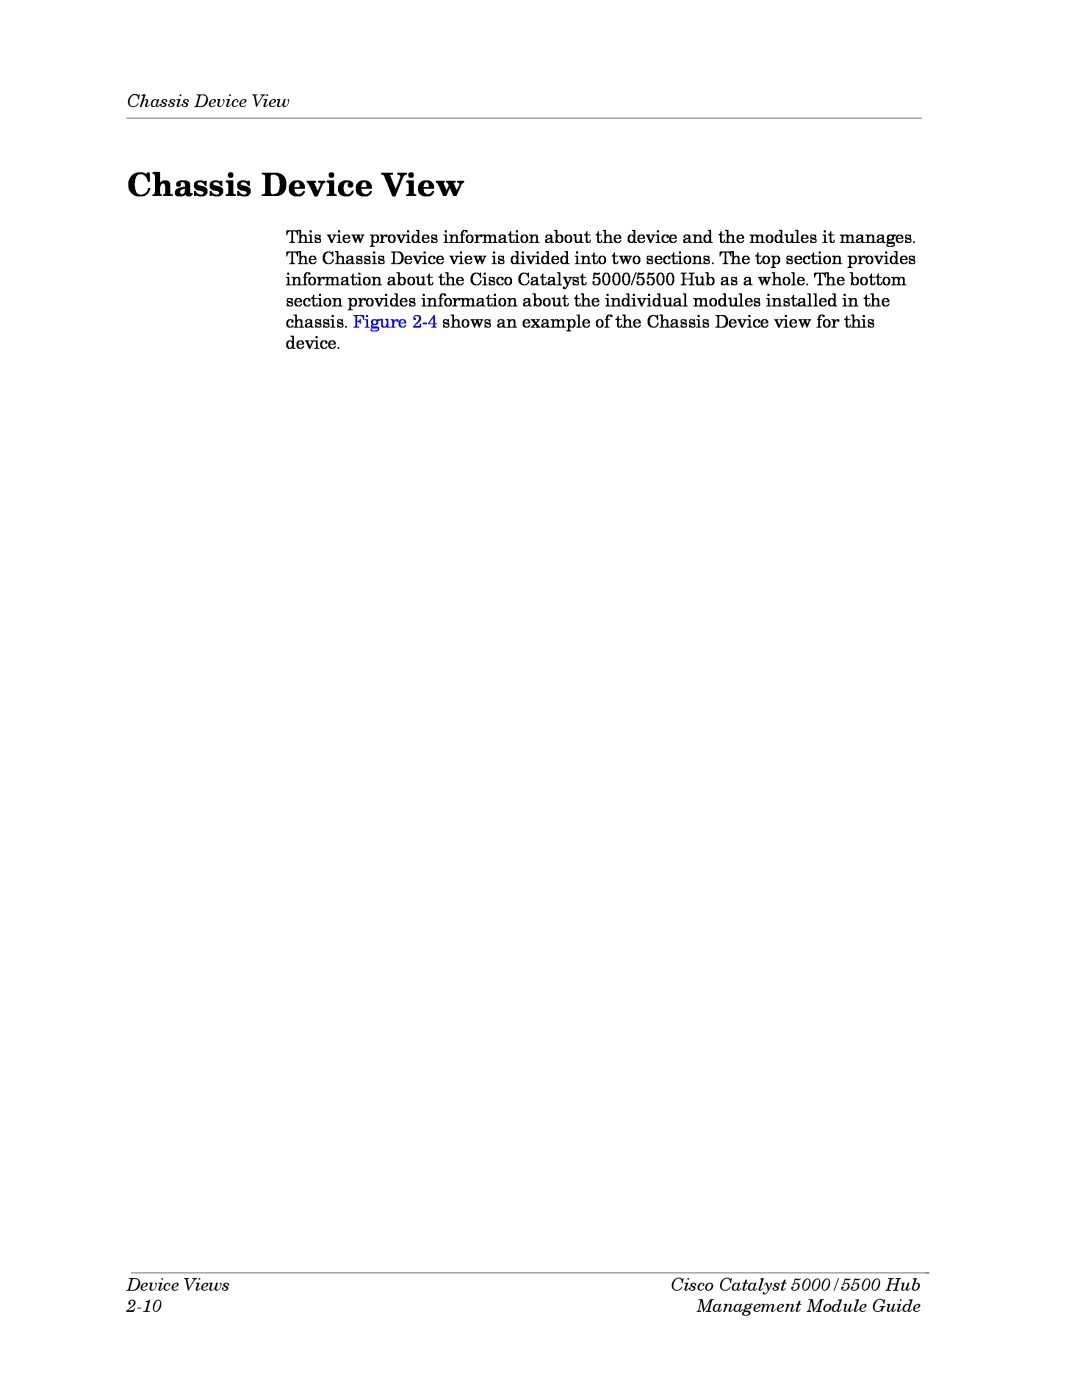 Cabletron Systems manual Chassis Device View, 2-10, Device Views, Cisco Catalyst 5000/5500 Hub, Management Module Guide 